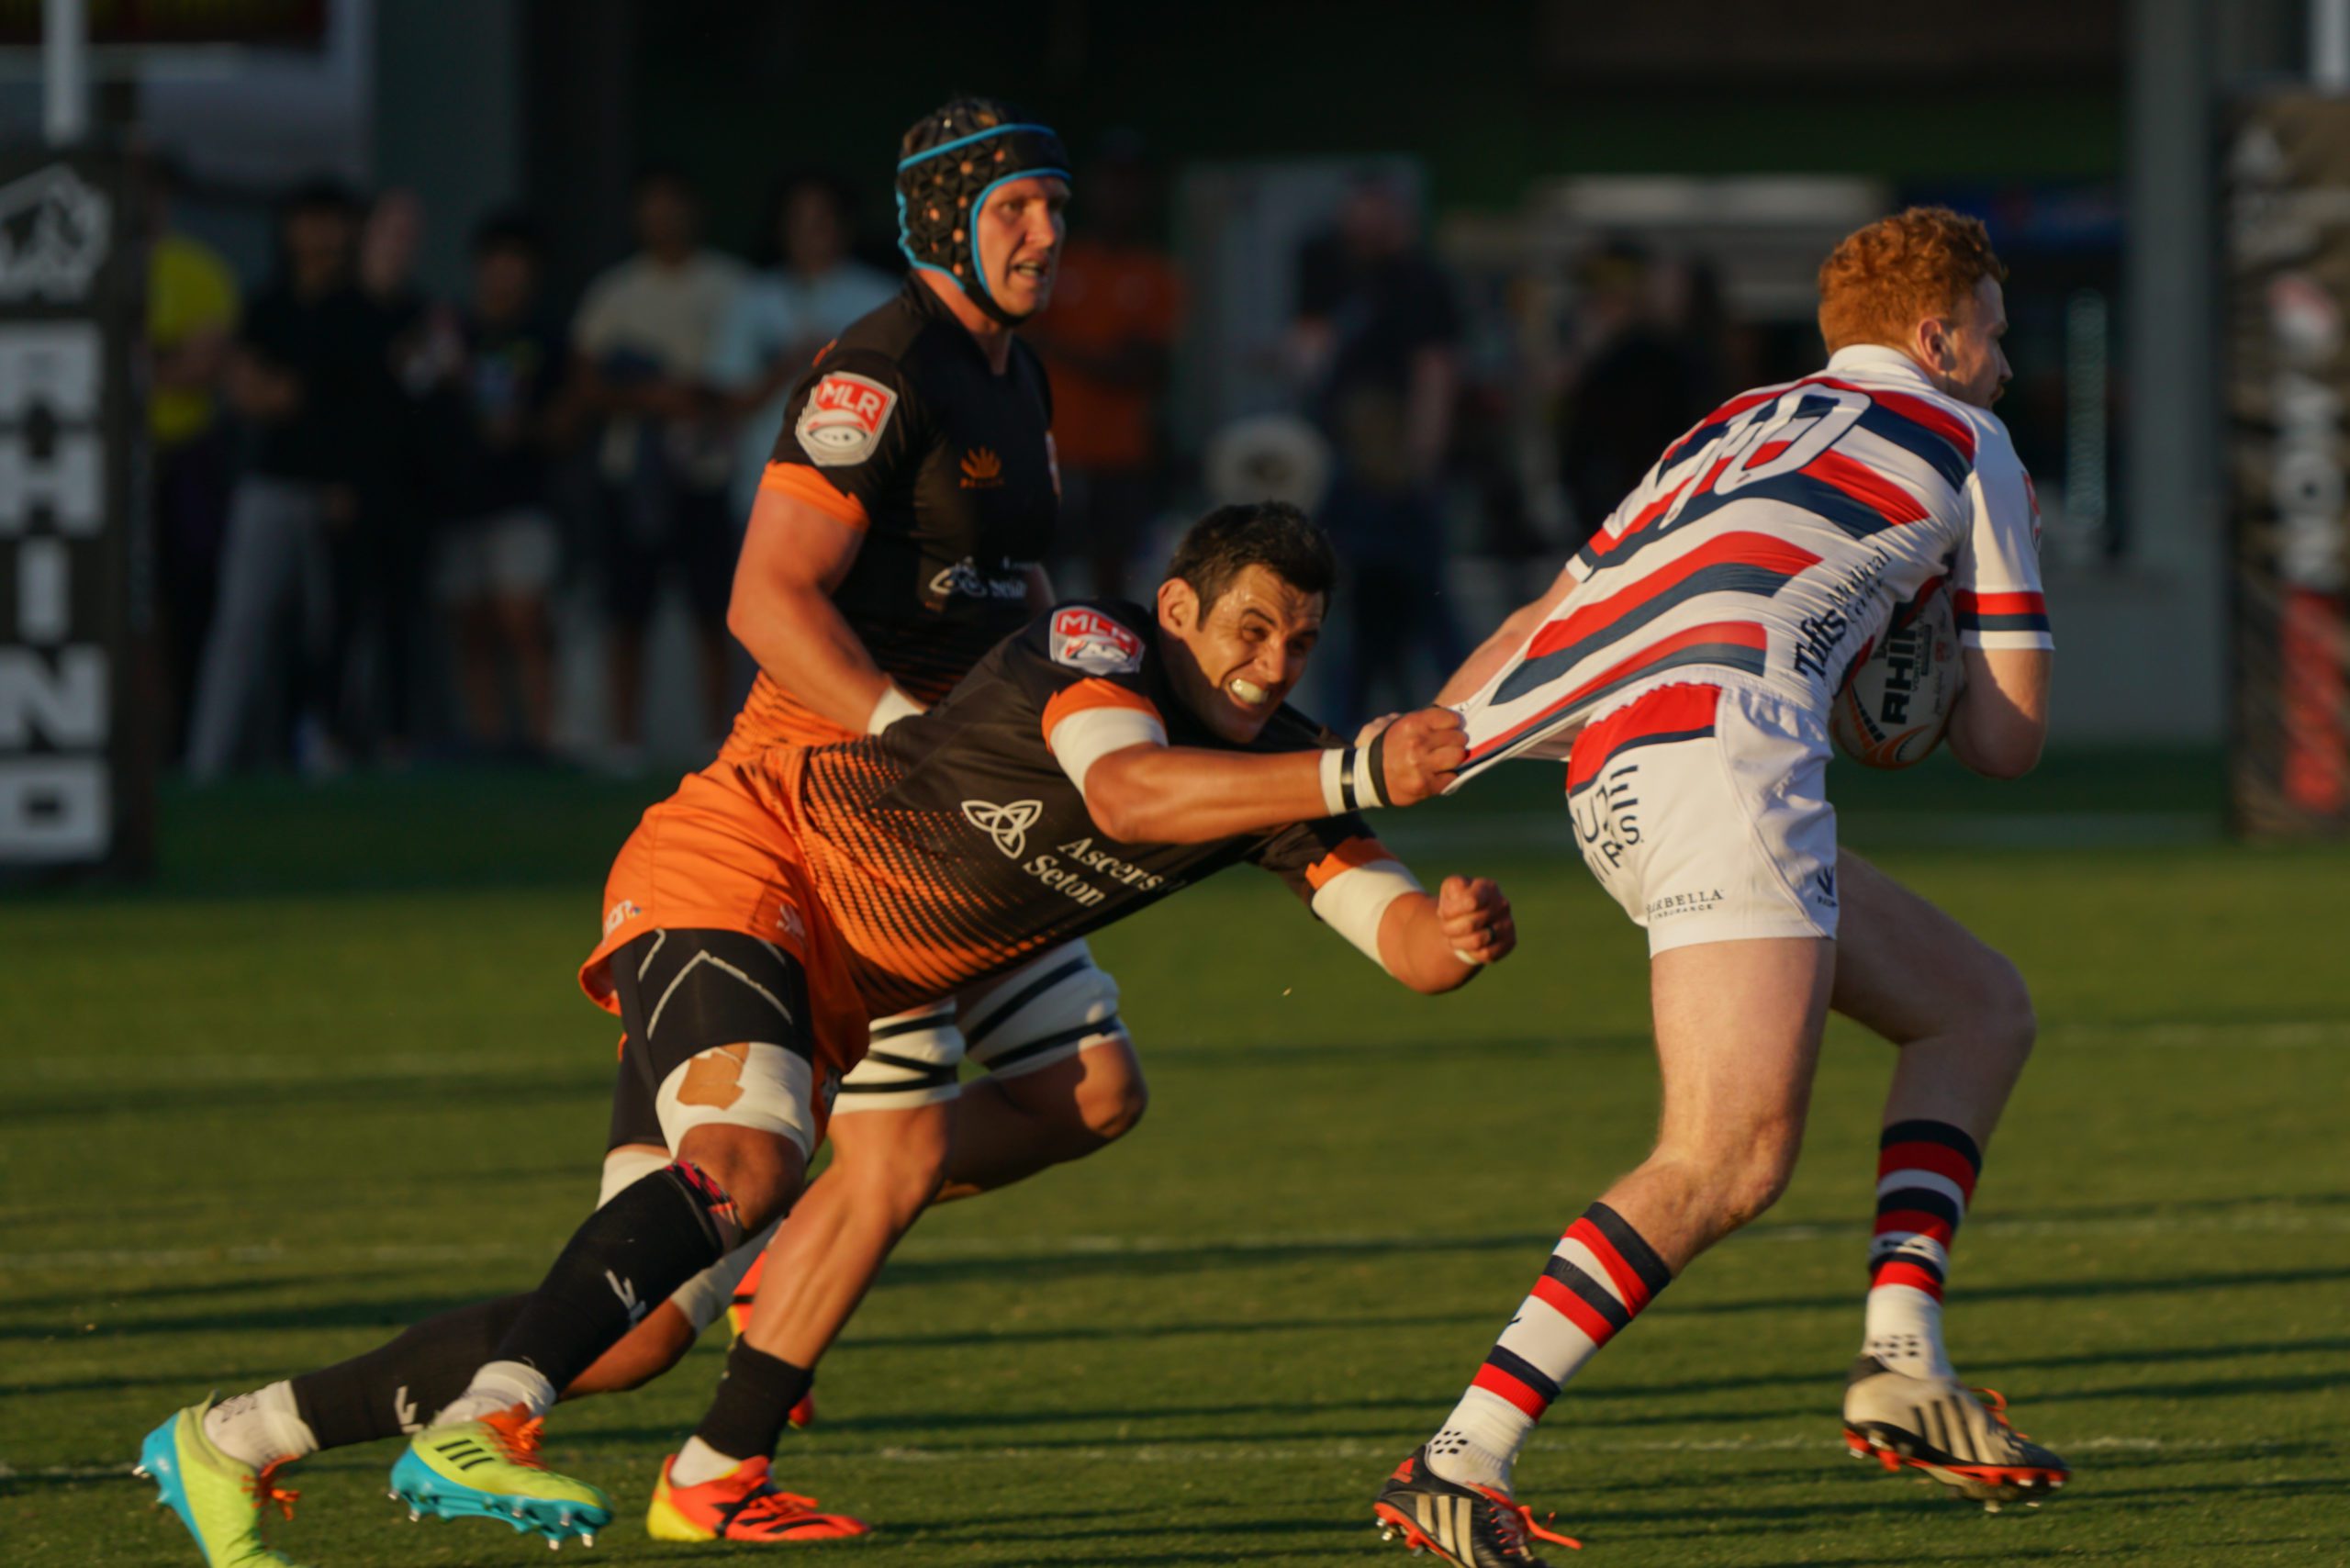 AG Rugby Falls To New England Free Jacks